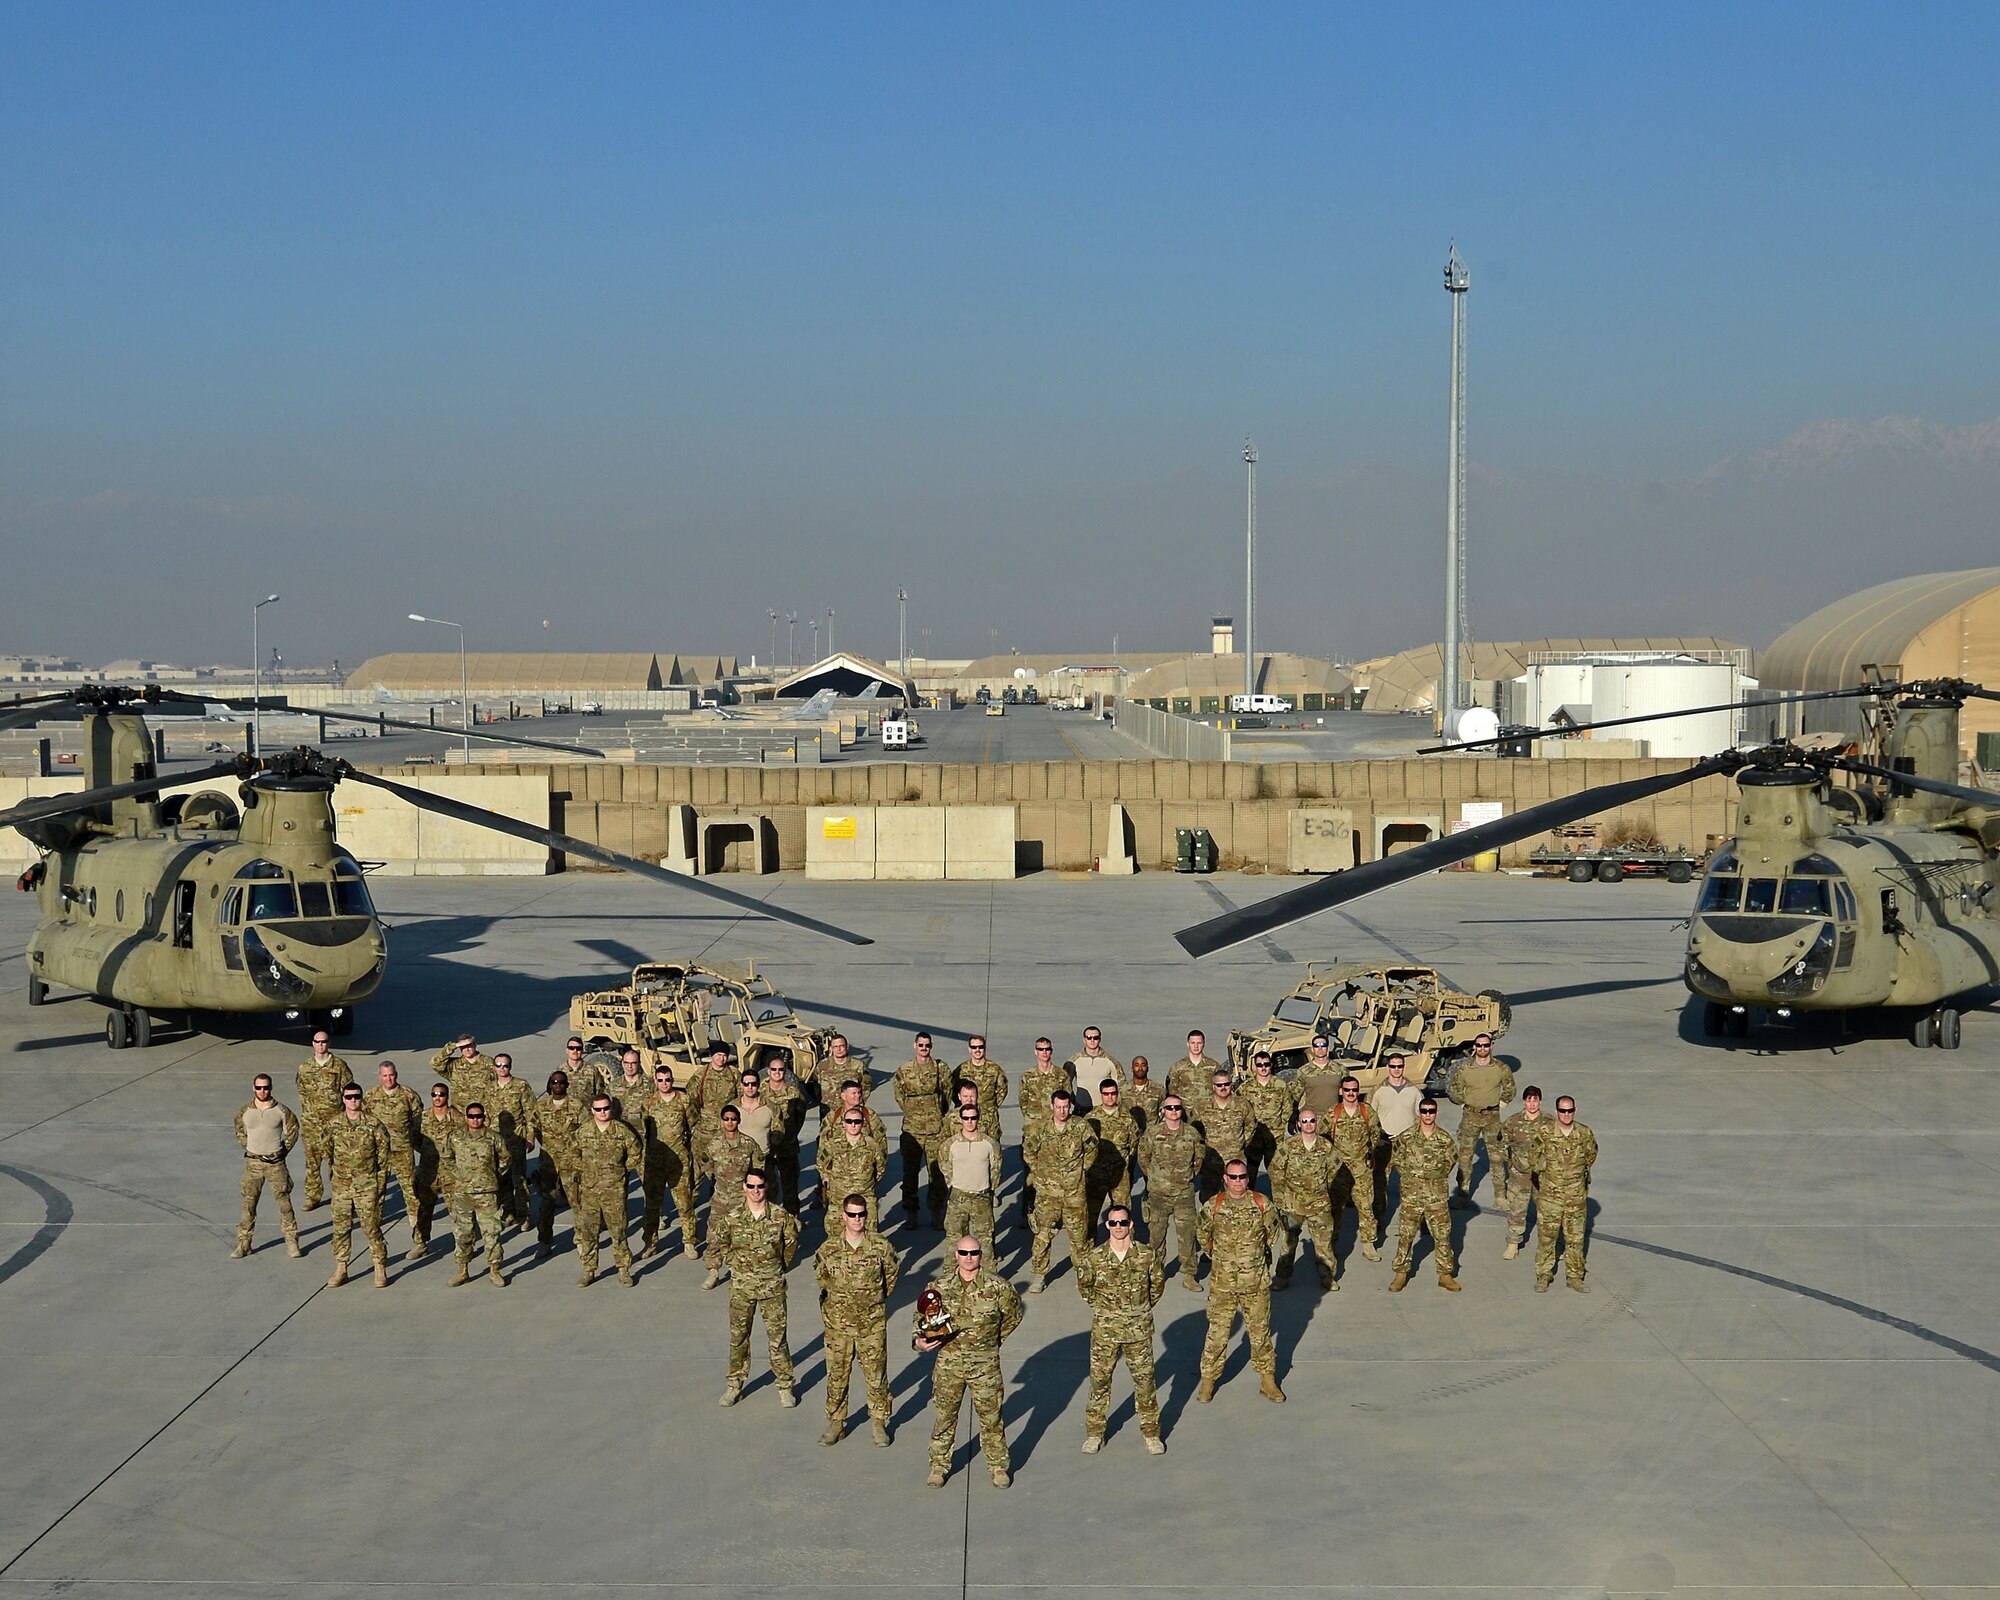 The 83rd Expeditionary Rescue Squadron poses for a photo at Bagram Airfield, Afghanistan. The 83rd ERQS is Air Force Central Command’s first dedicated joint personnel recovery team, utilizing Air Force Guardian Angel teams and Army CH-47 Chinook crews. (U.S. Air Force photo by Staff Sgt. Divine Cox)